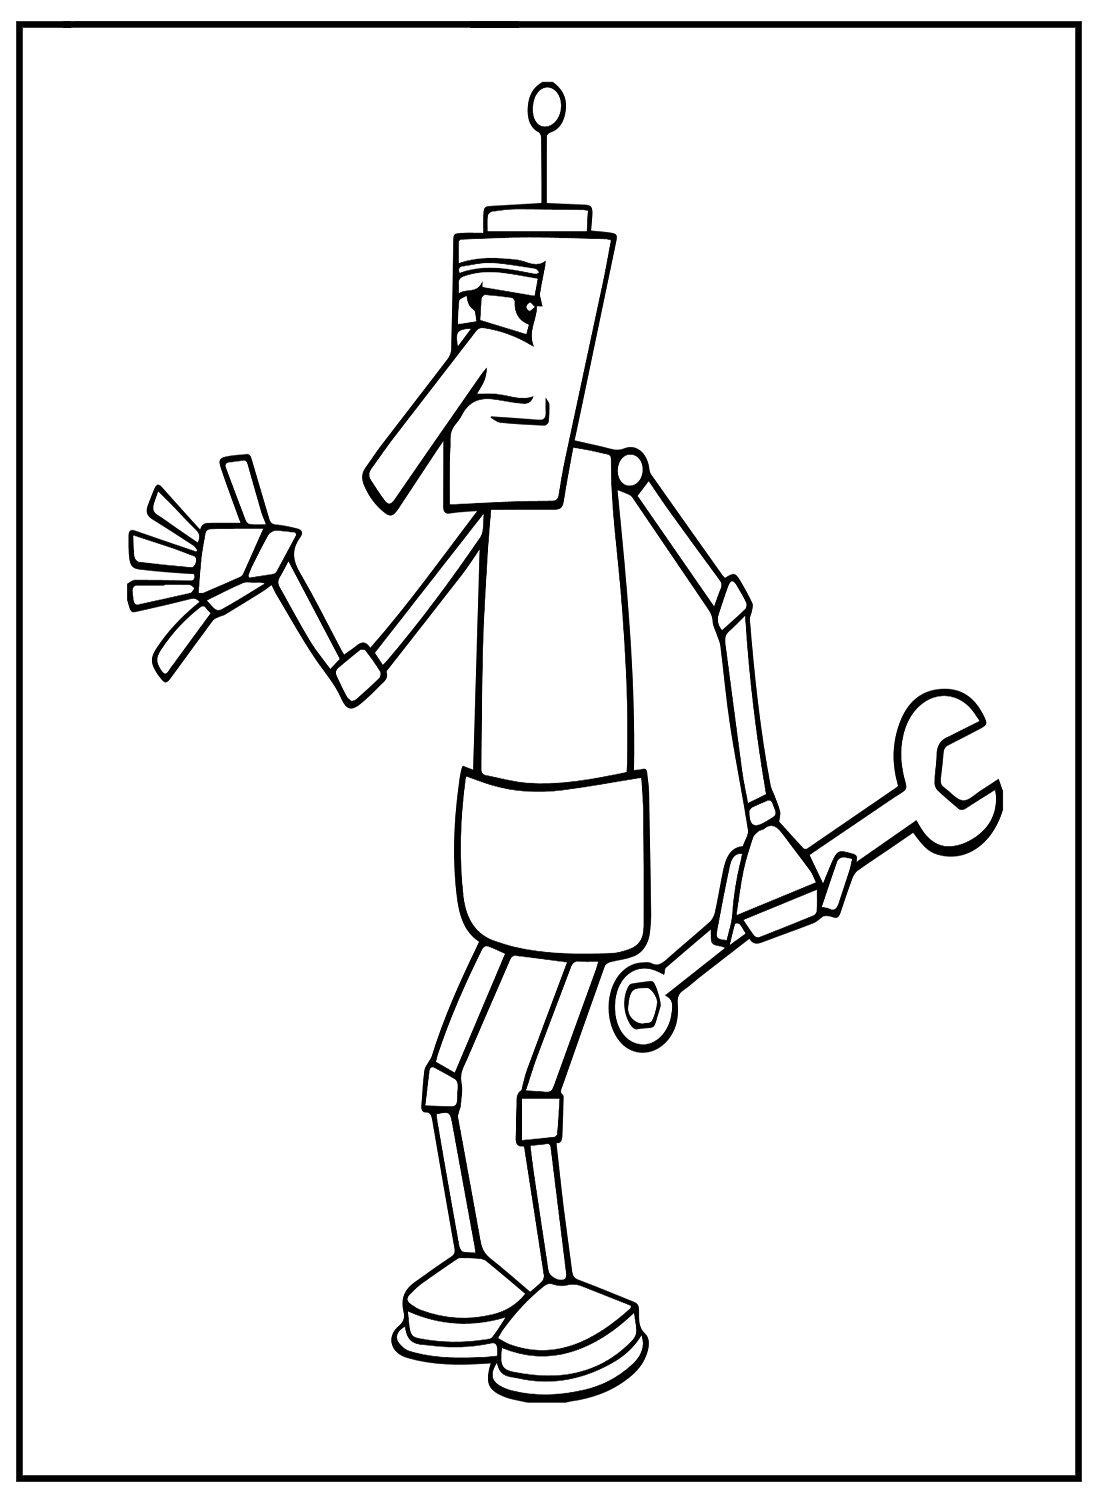 Robot And Wrench Coloring Pages